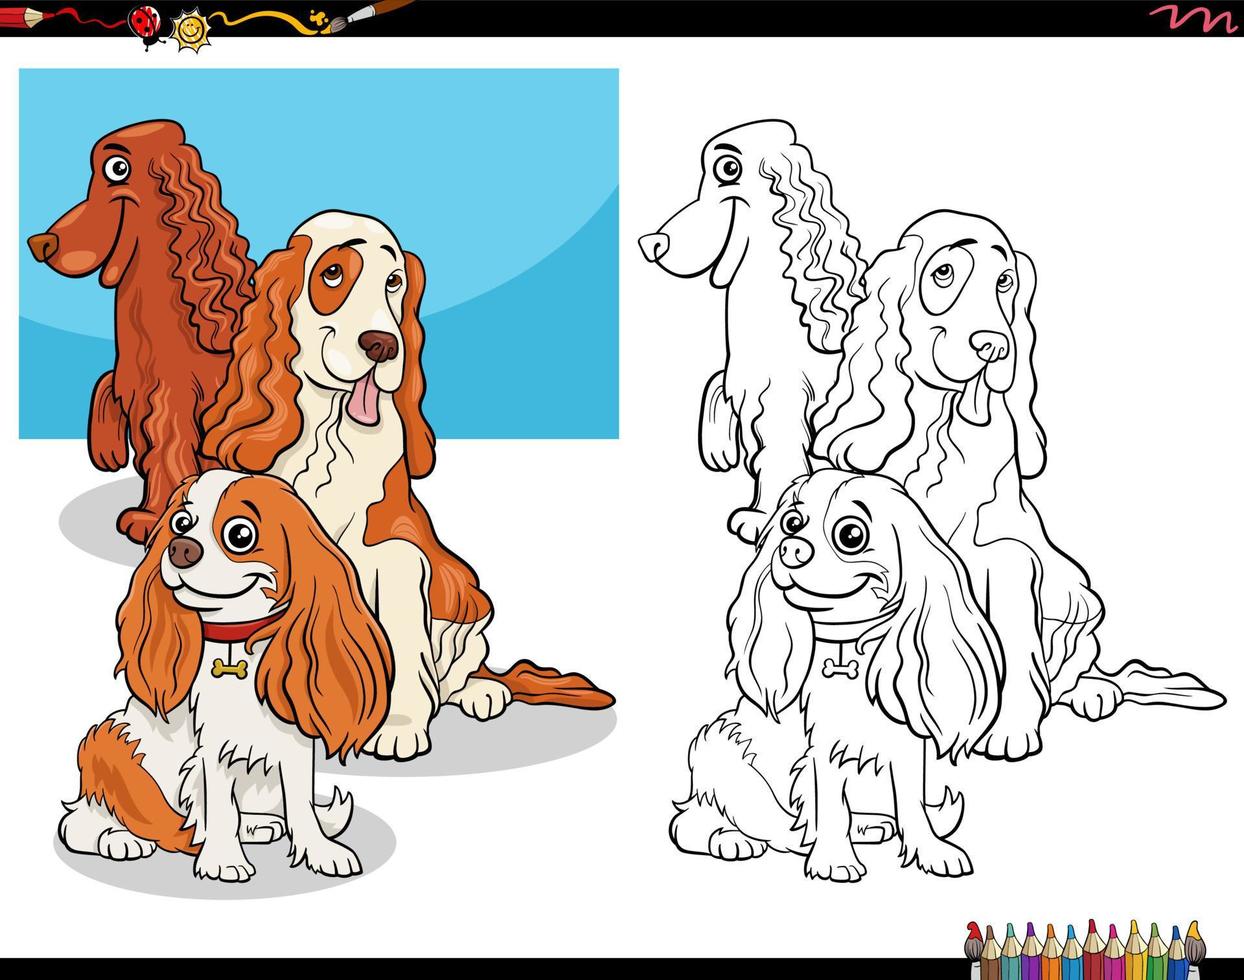 cartoon spaniels purebred dog characters coloring book page vector